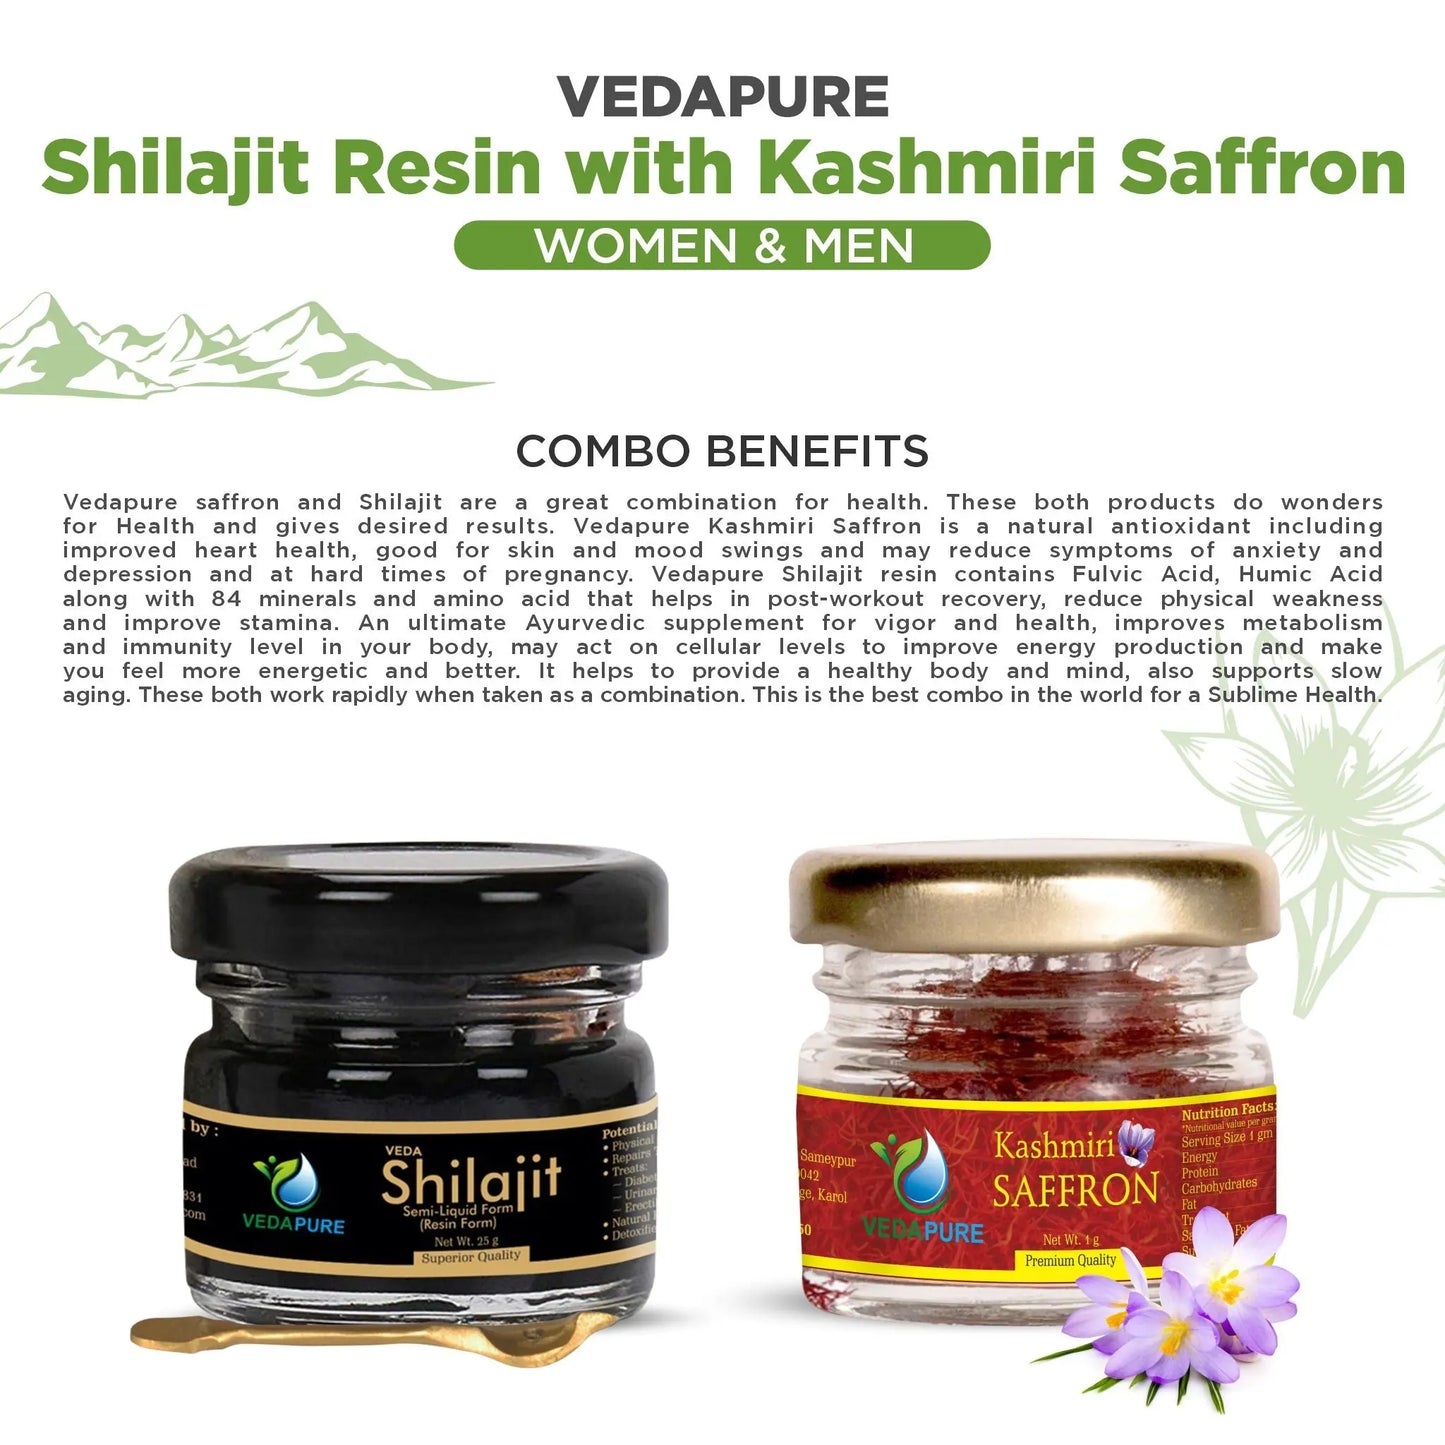 Vedapure Ayurvedic Natural and Pure Raw 25g Shilajit Resin with 1g Kashmir Kesar Saffron Combo Pack Vedapure Naturals